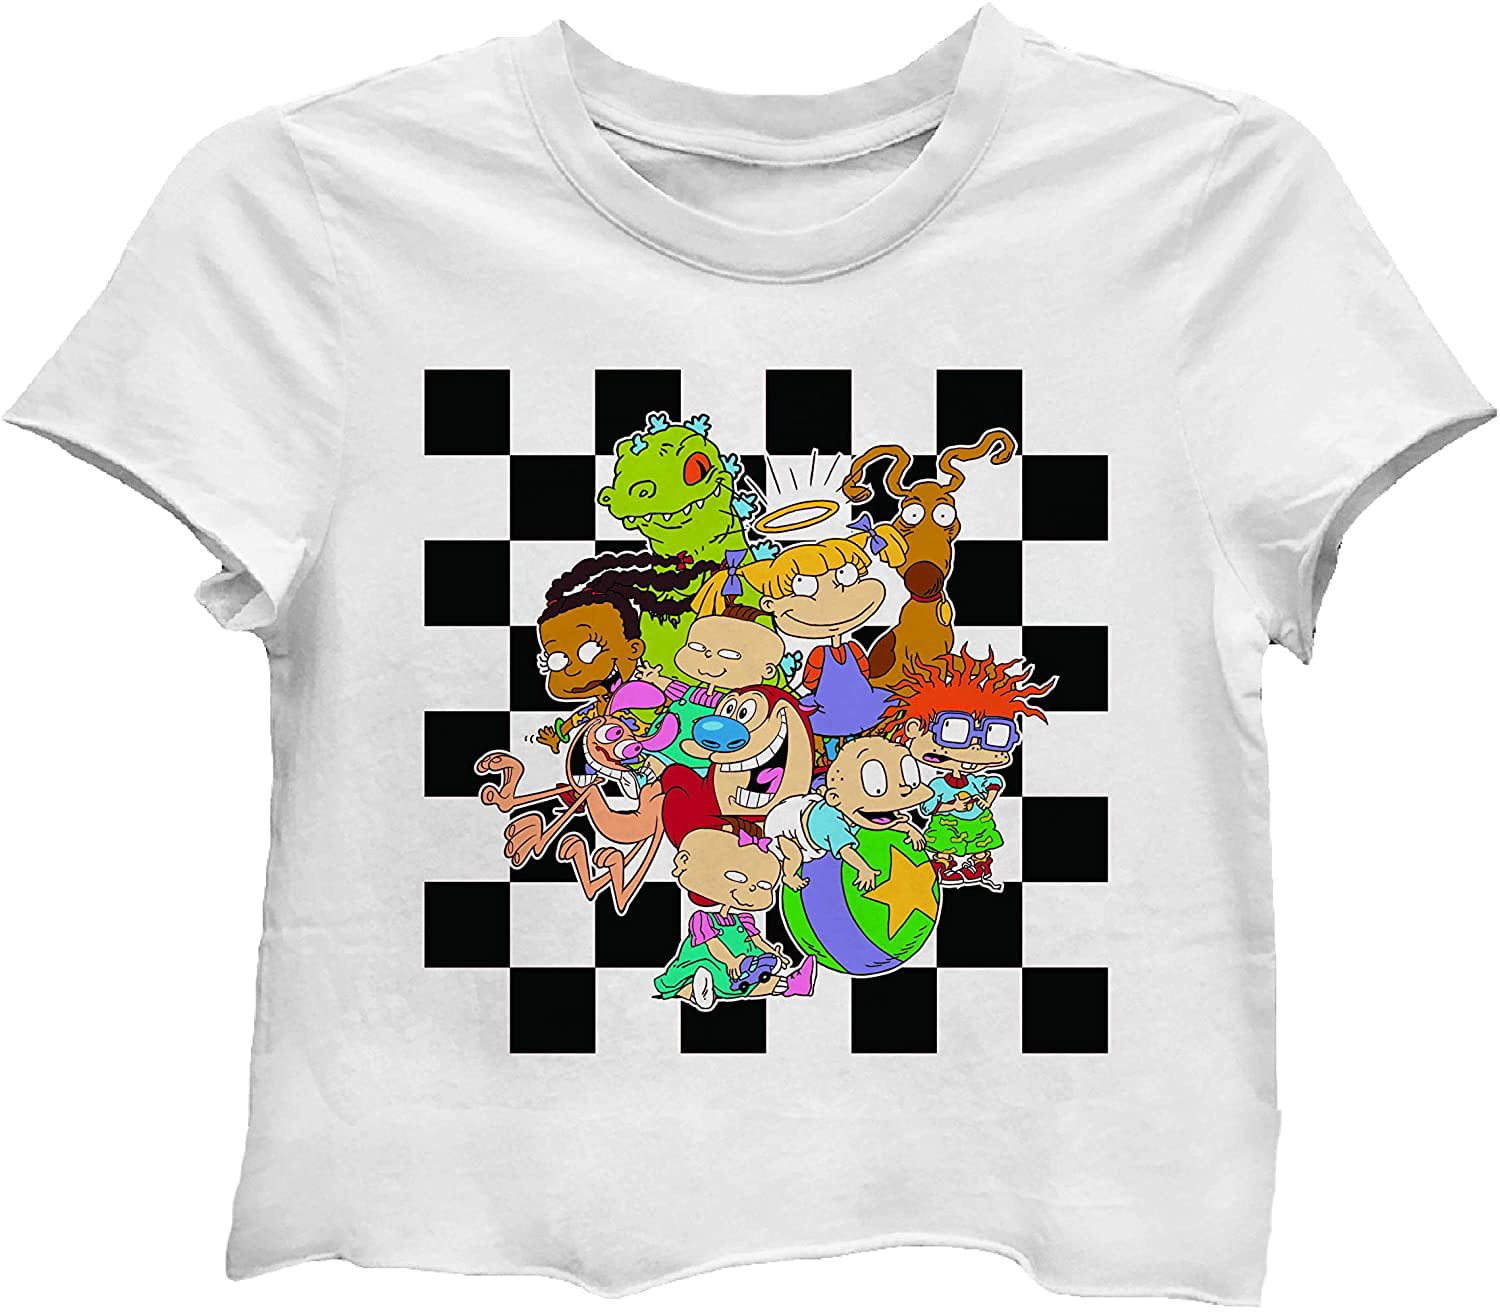 Men Rugrats Chuckie Finster Tommy Pickles Funny White T-Shirt S-6XL Shirts